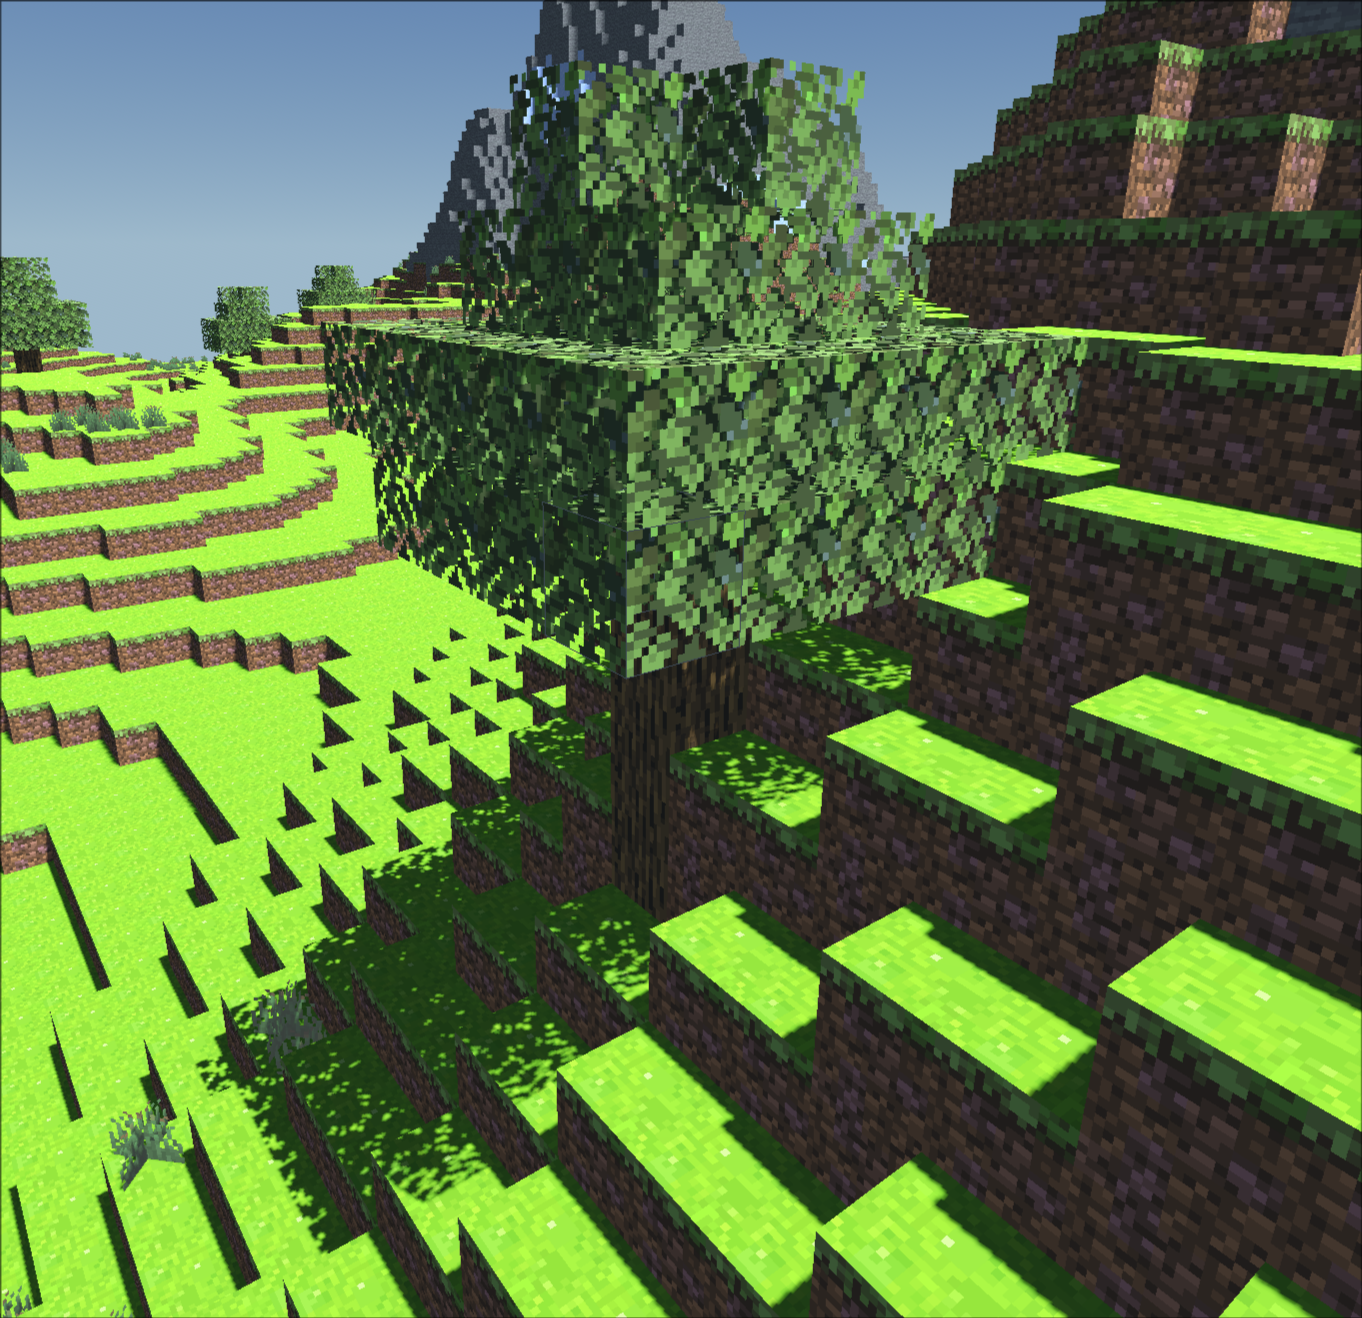 Screenshot of Minecraft clone, showing tall mountains with patches of ice emerging from grassy hills, taken from
                              in front of a tree.